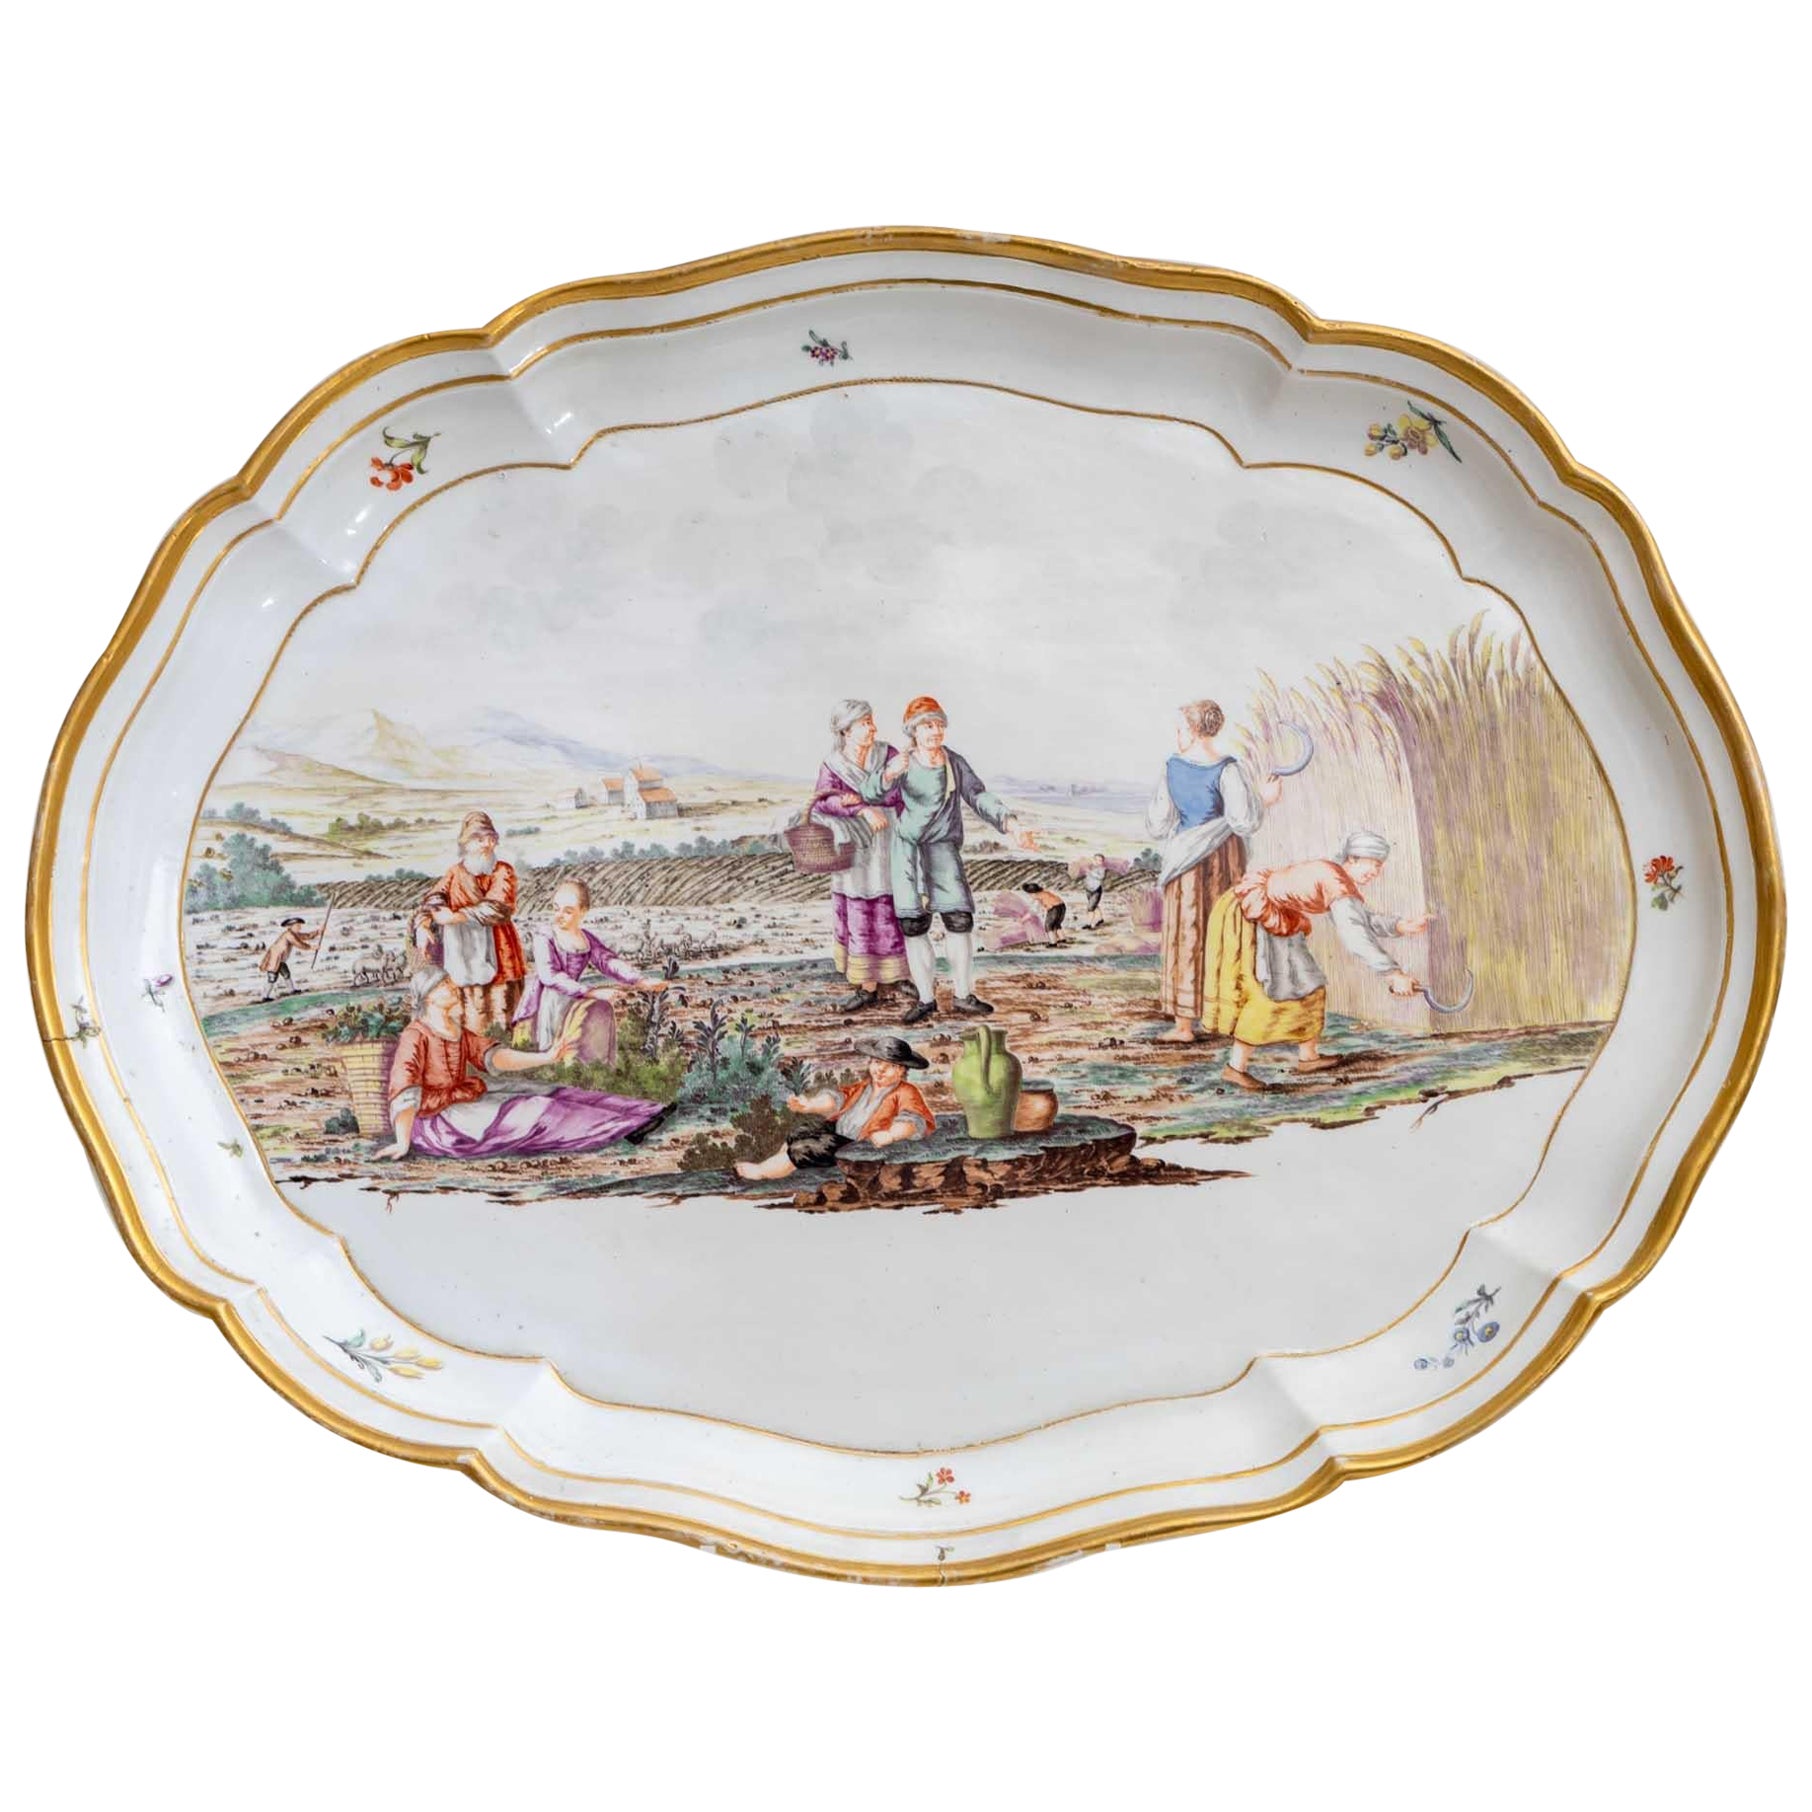 Oval Plate with Harvest Scene, Nymphenburg, C. 1770-75